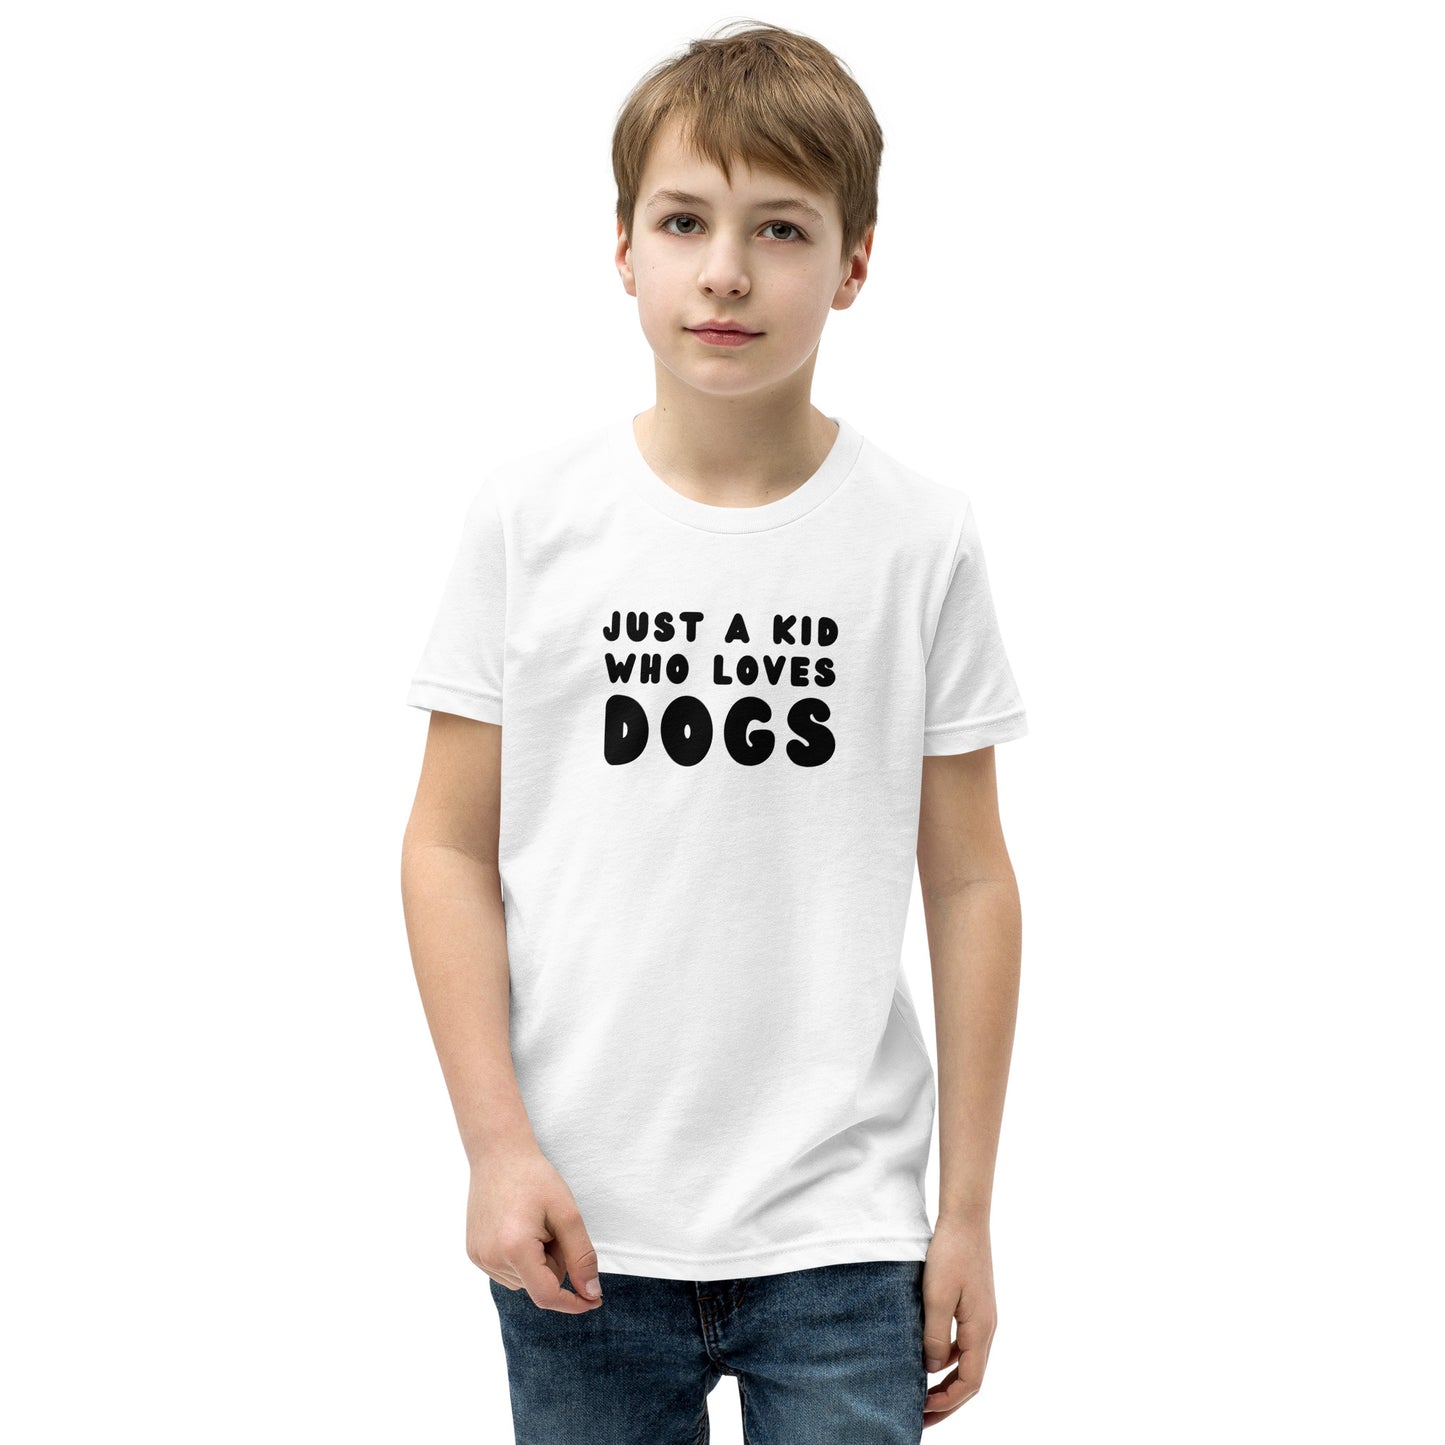 Just a kid who loves dogs kid tshirt for German Shepherd lovers, kid color - GSD Colony